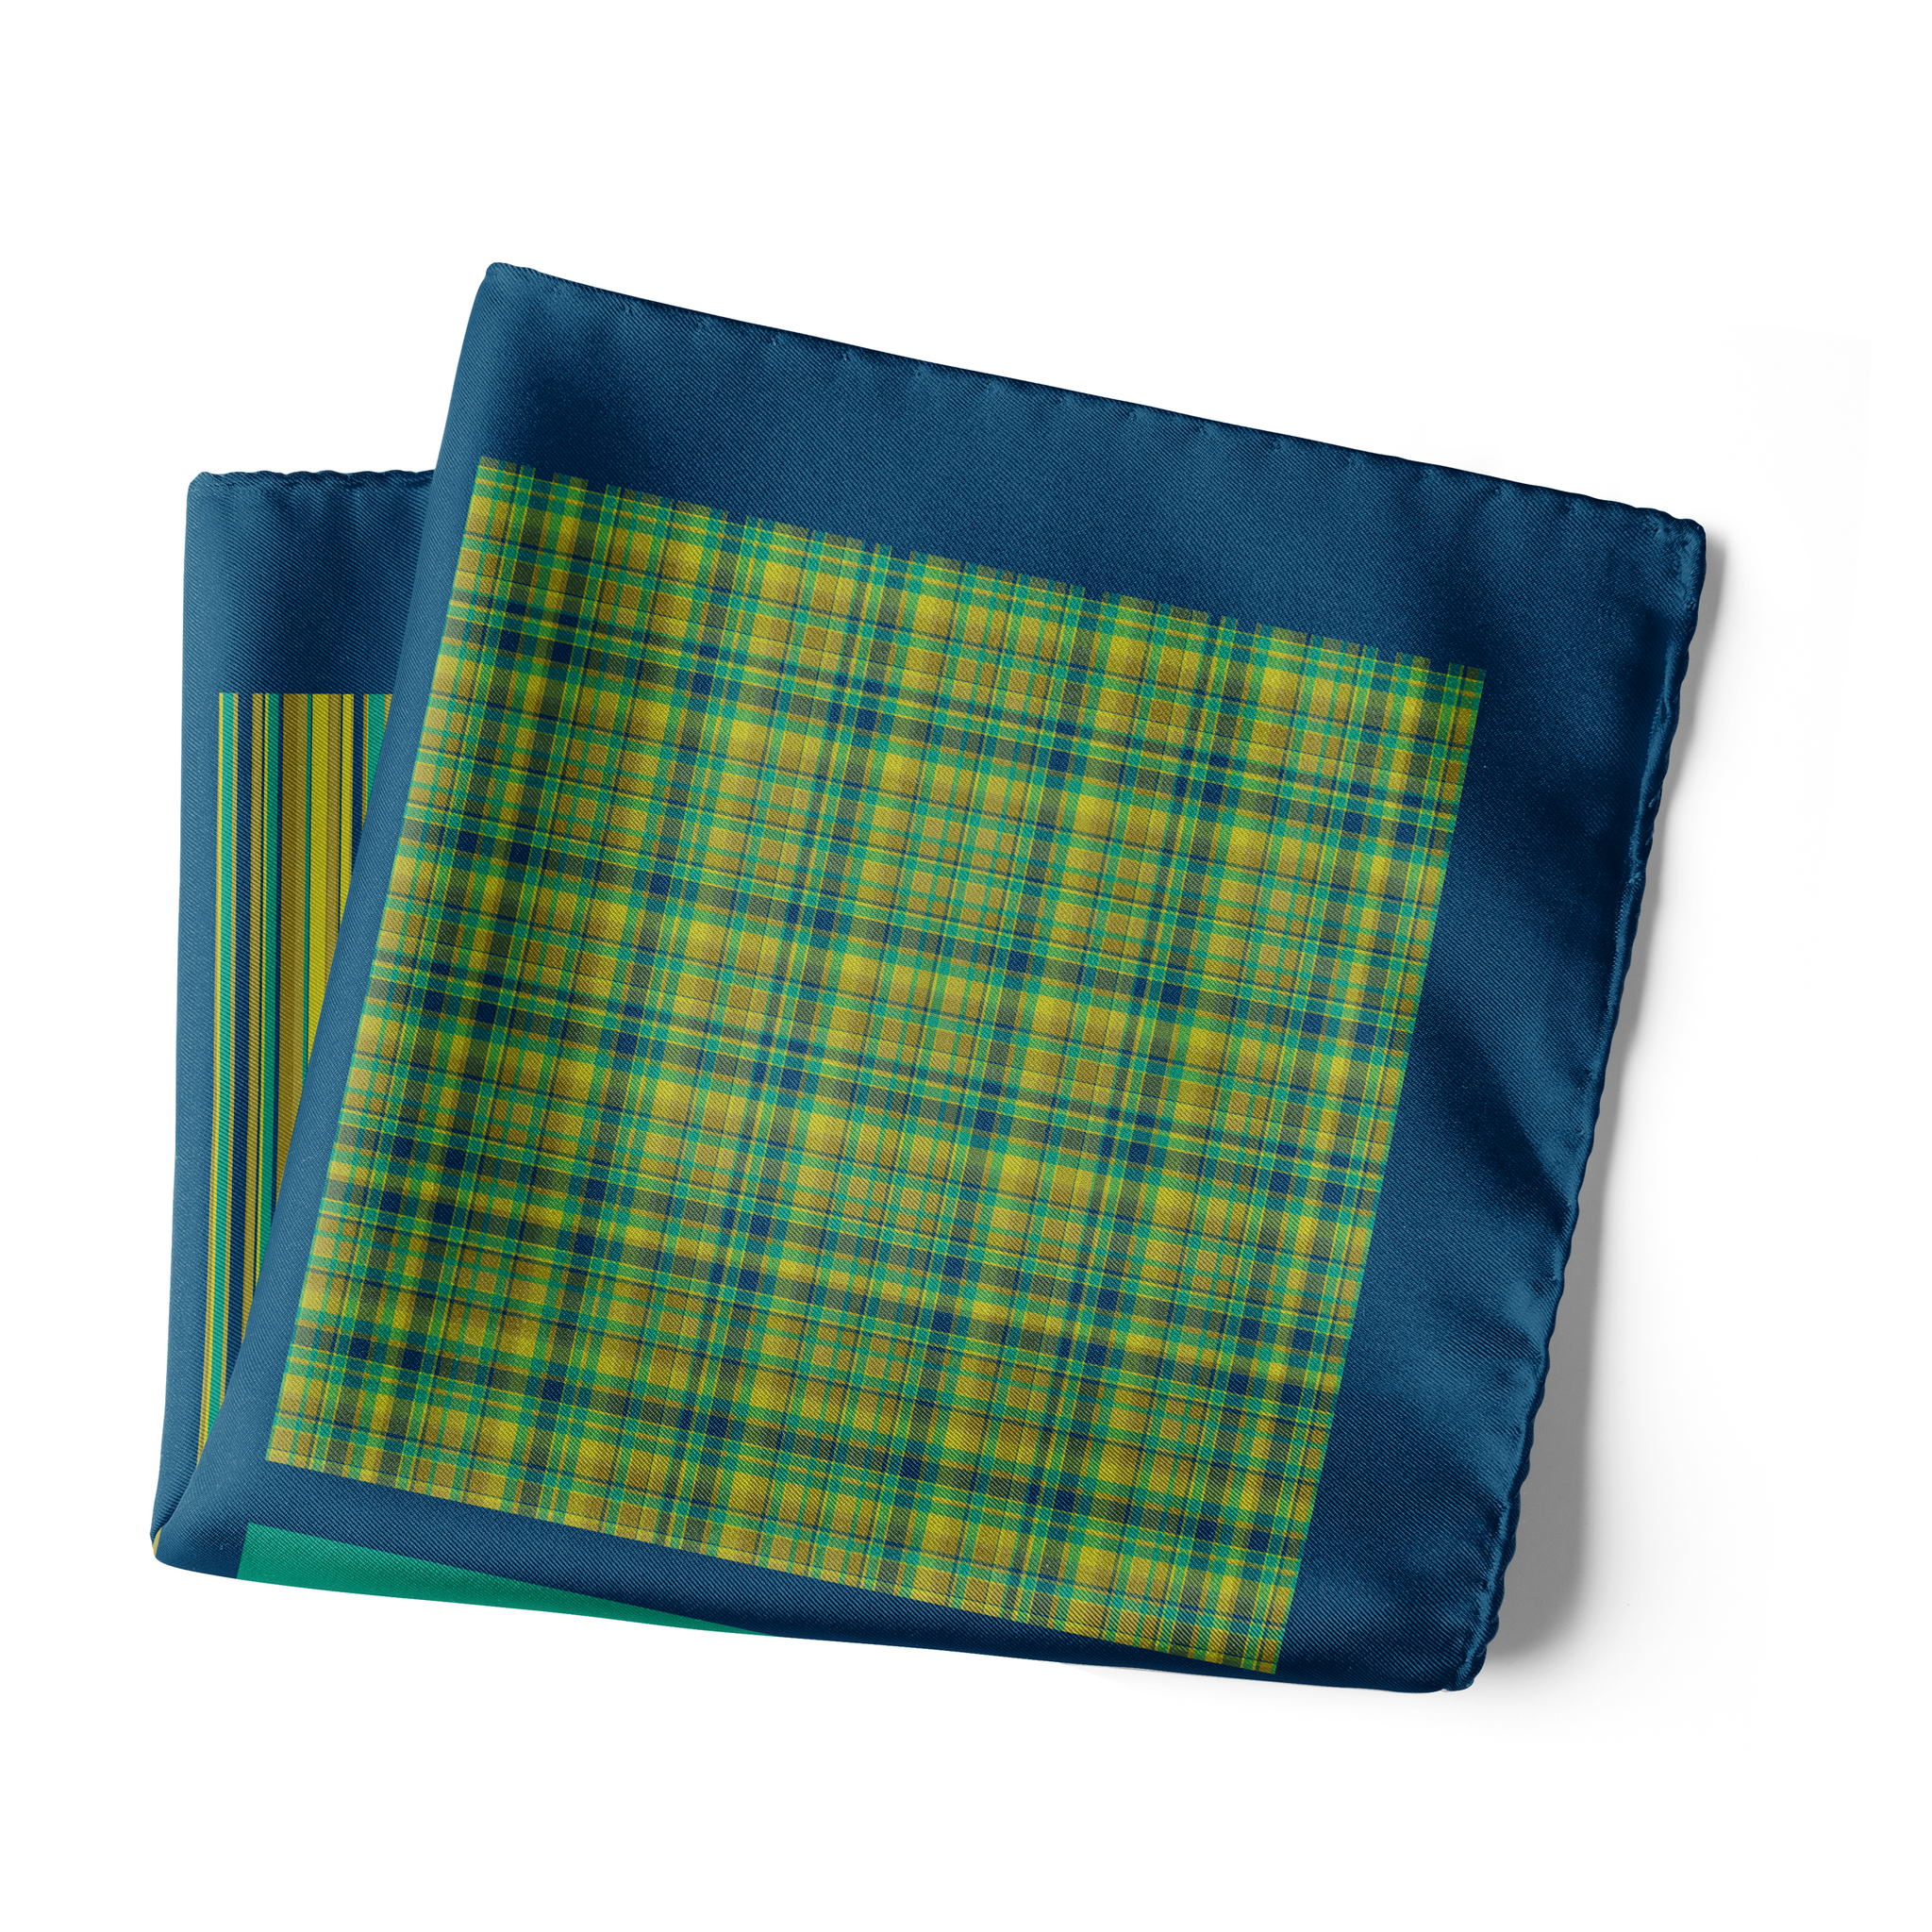 Chokore Four-in-One Shades of Green & Yellow Silk Pocket Square from the Plaids Line